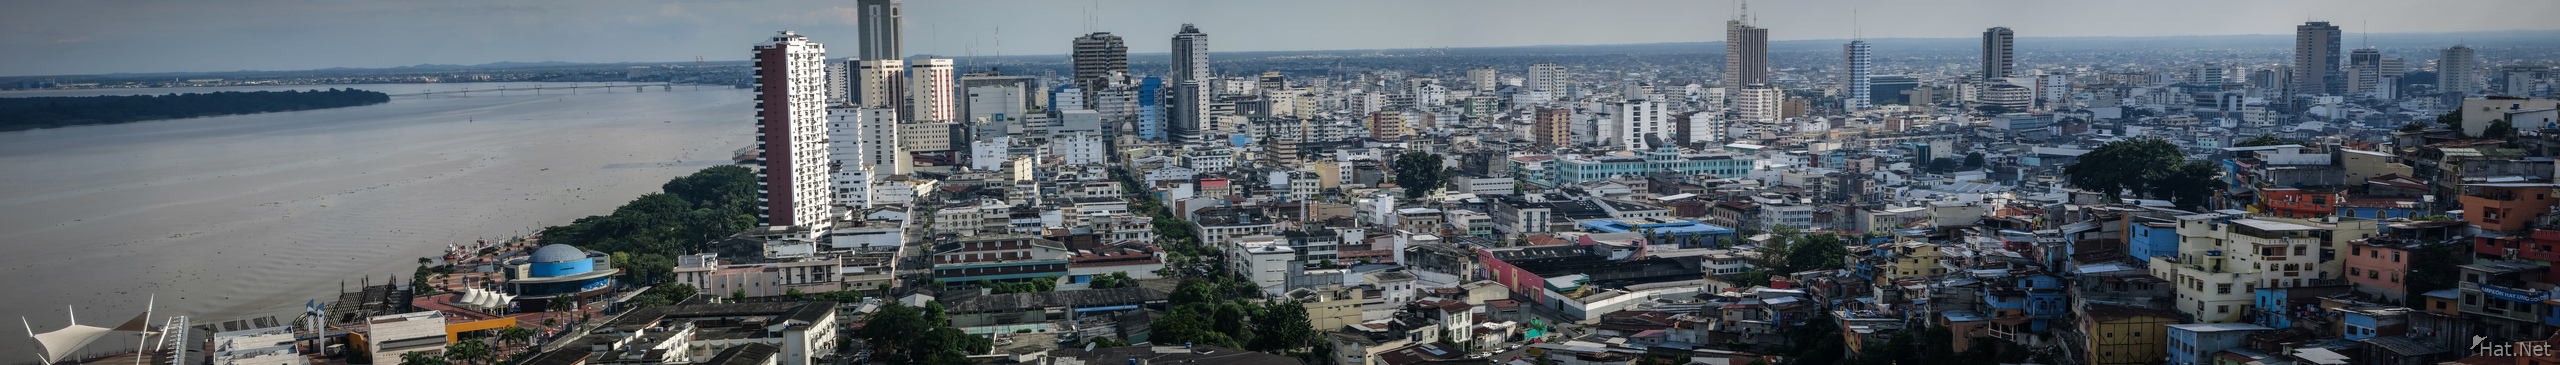 Guayaquil city Panorama from Las Penas